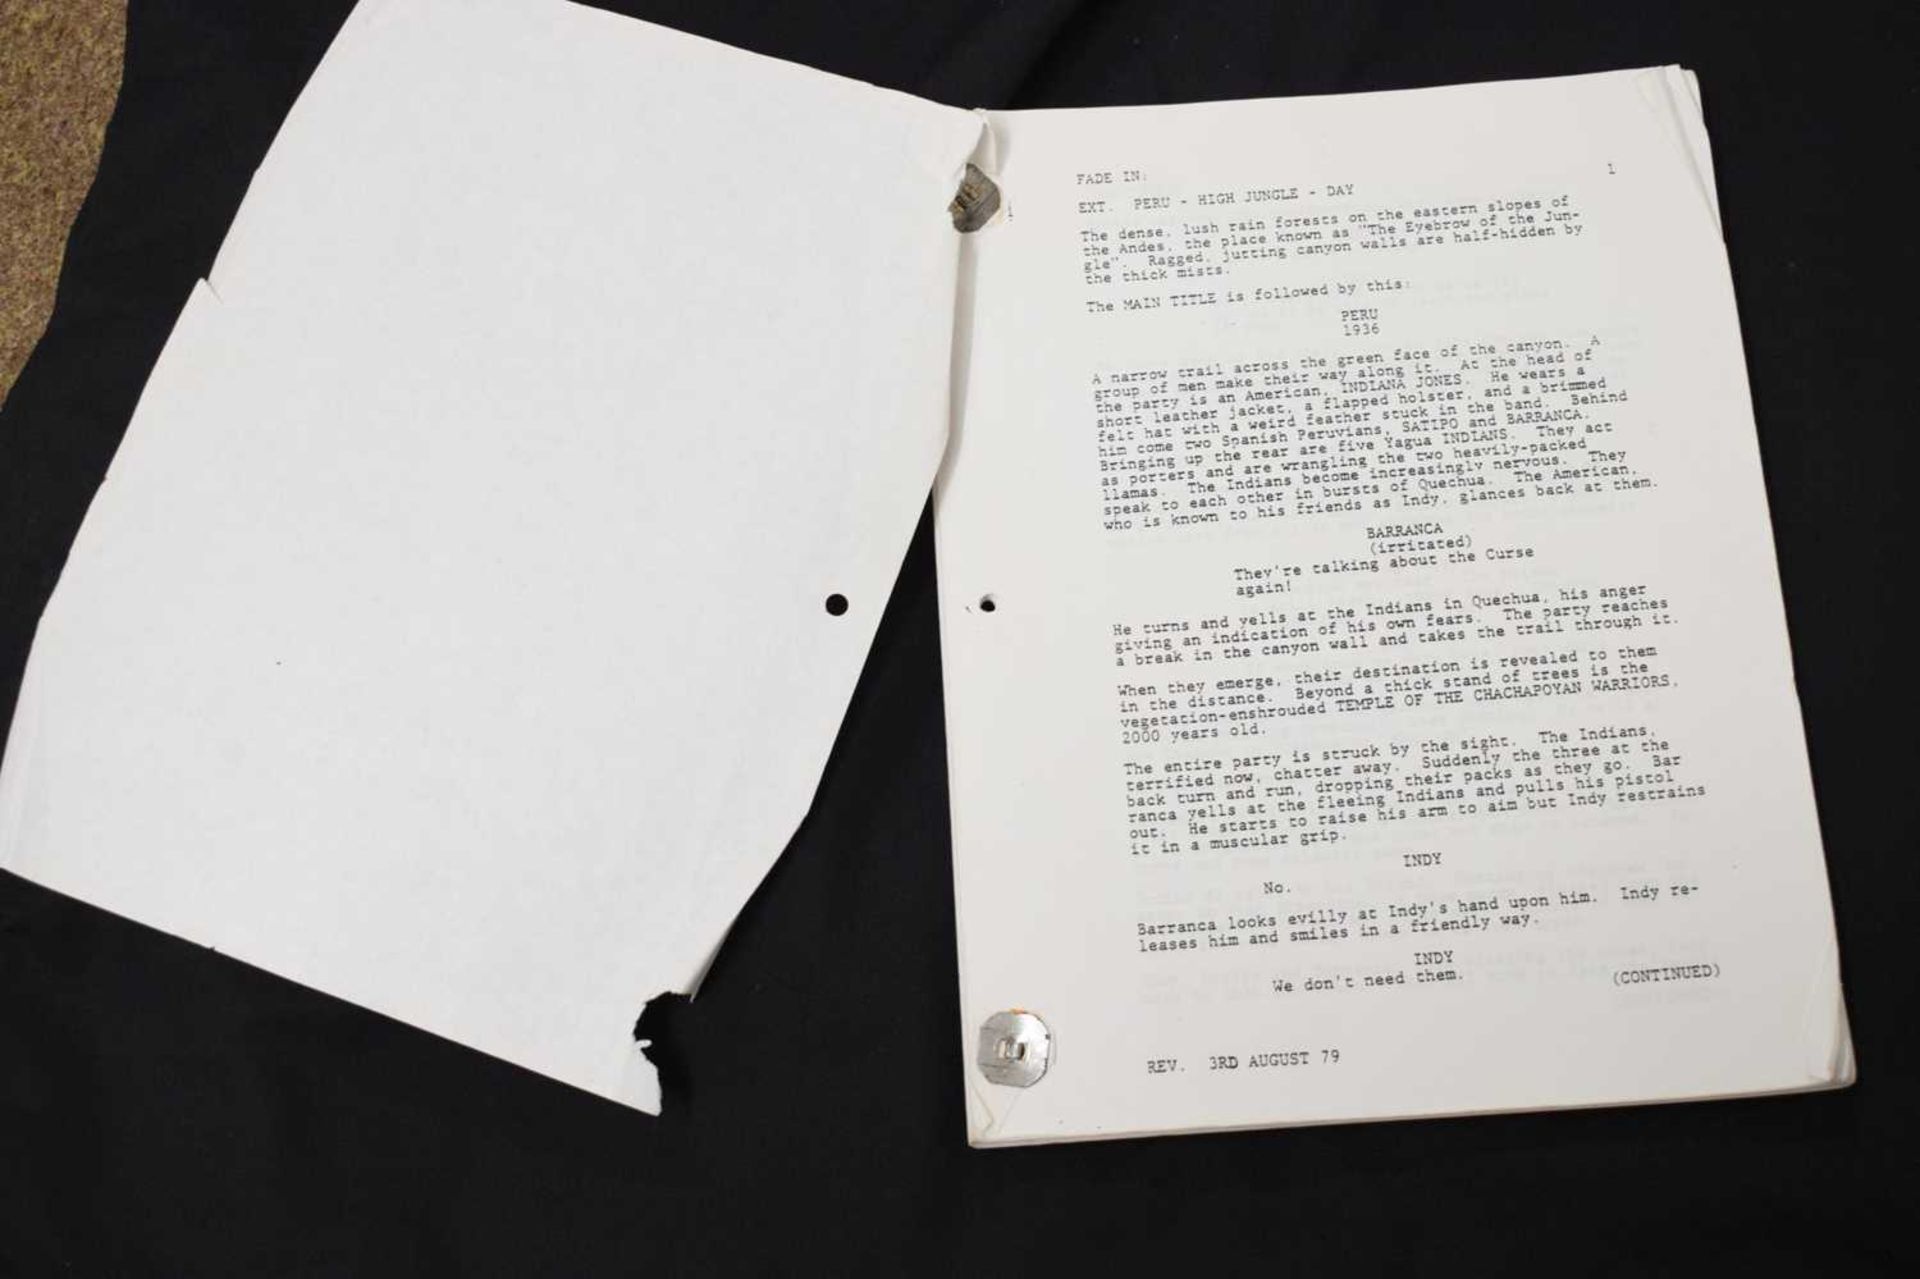 Raiders of the Lost Ark (1981) draft screenplay film script - third revised edition - Image 4 of 10